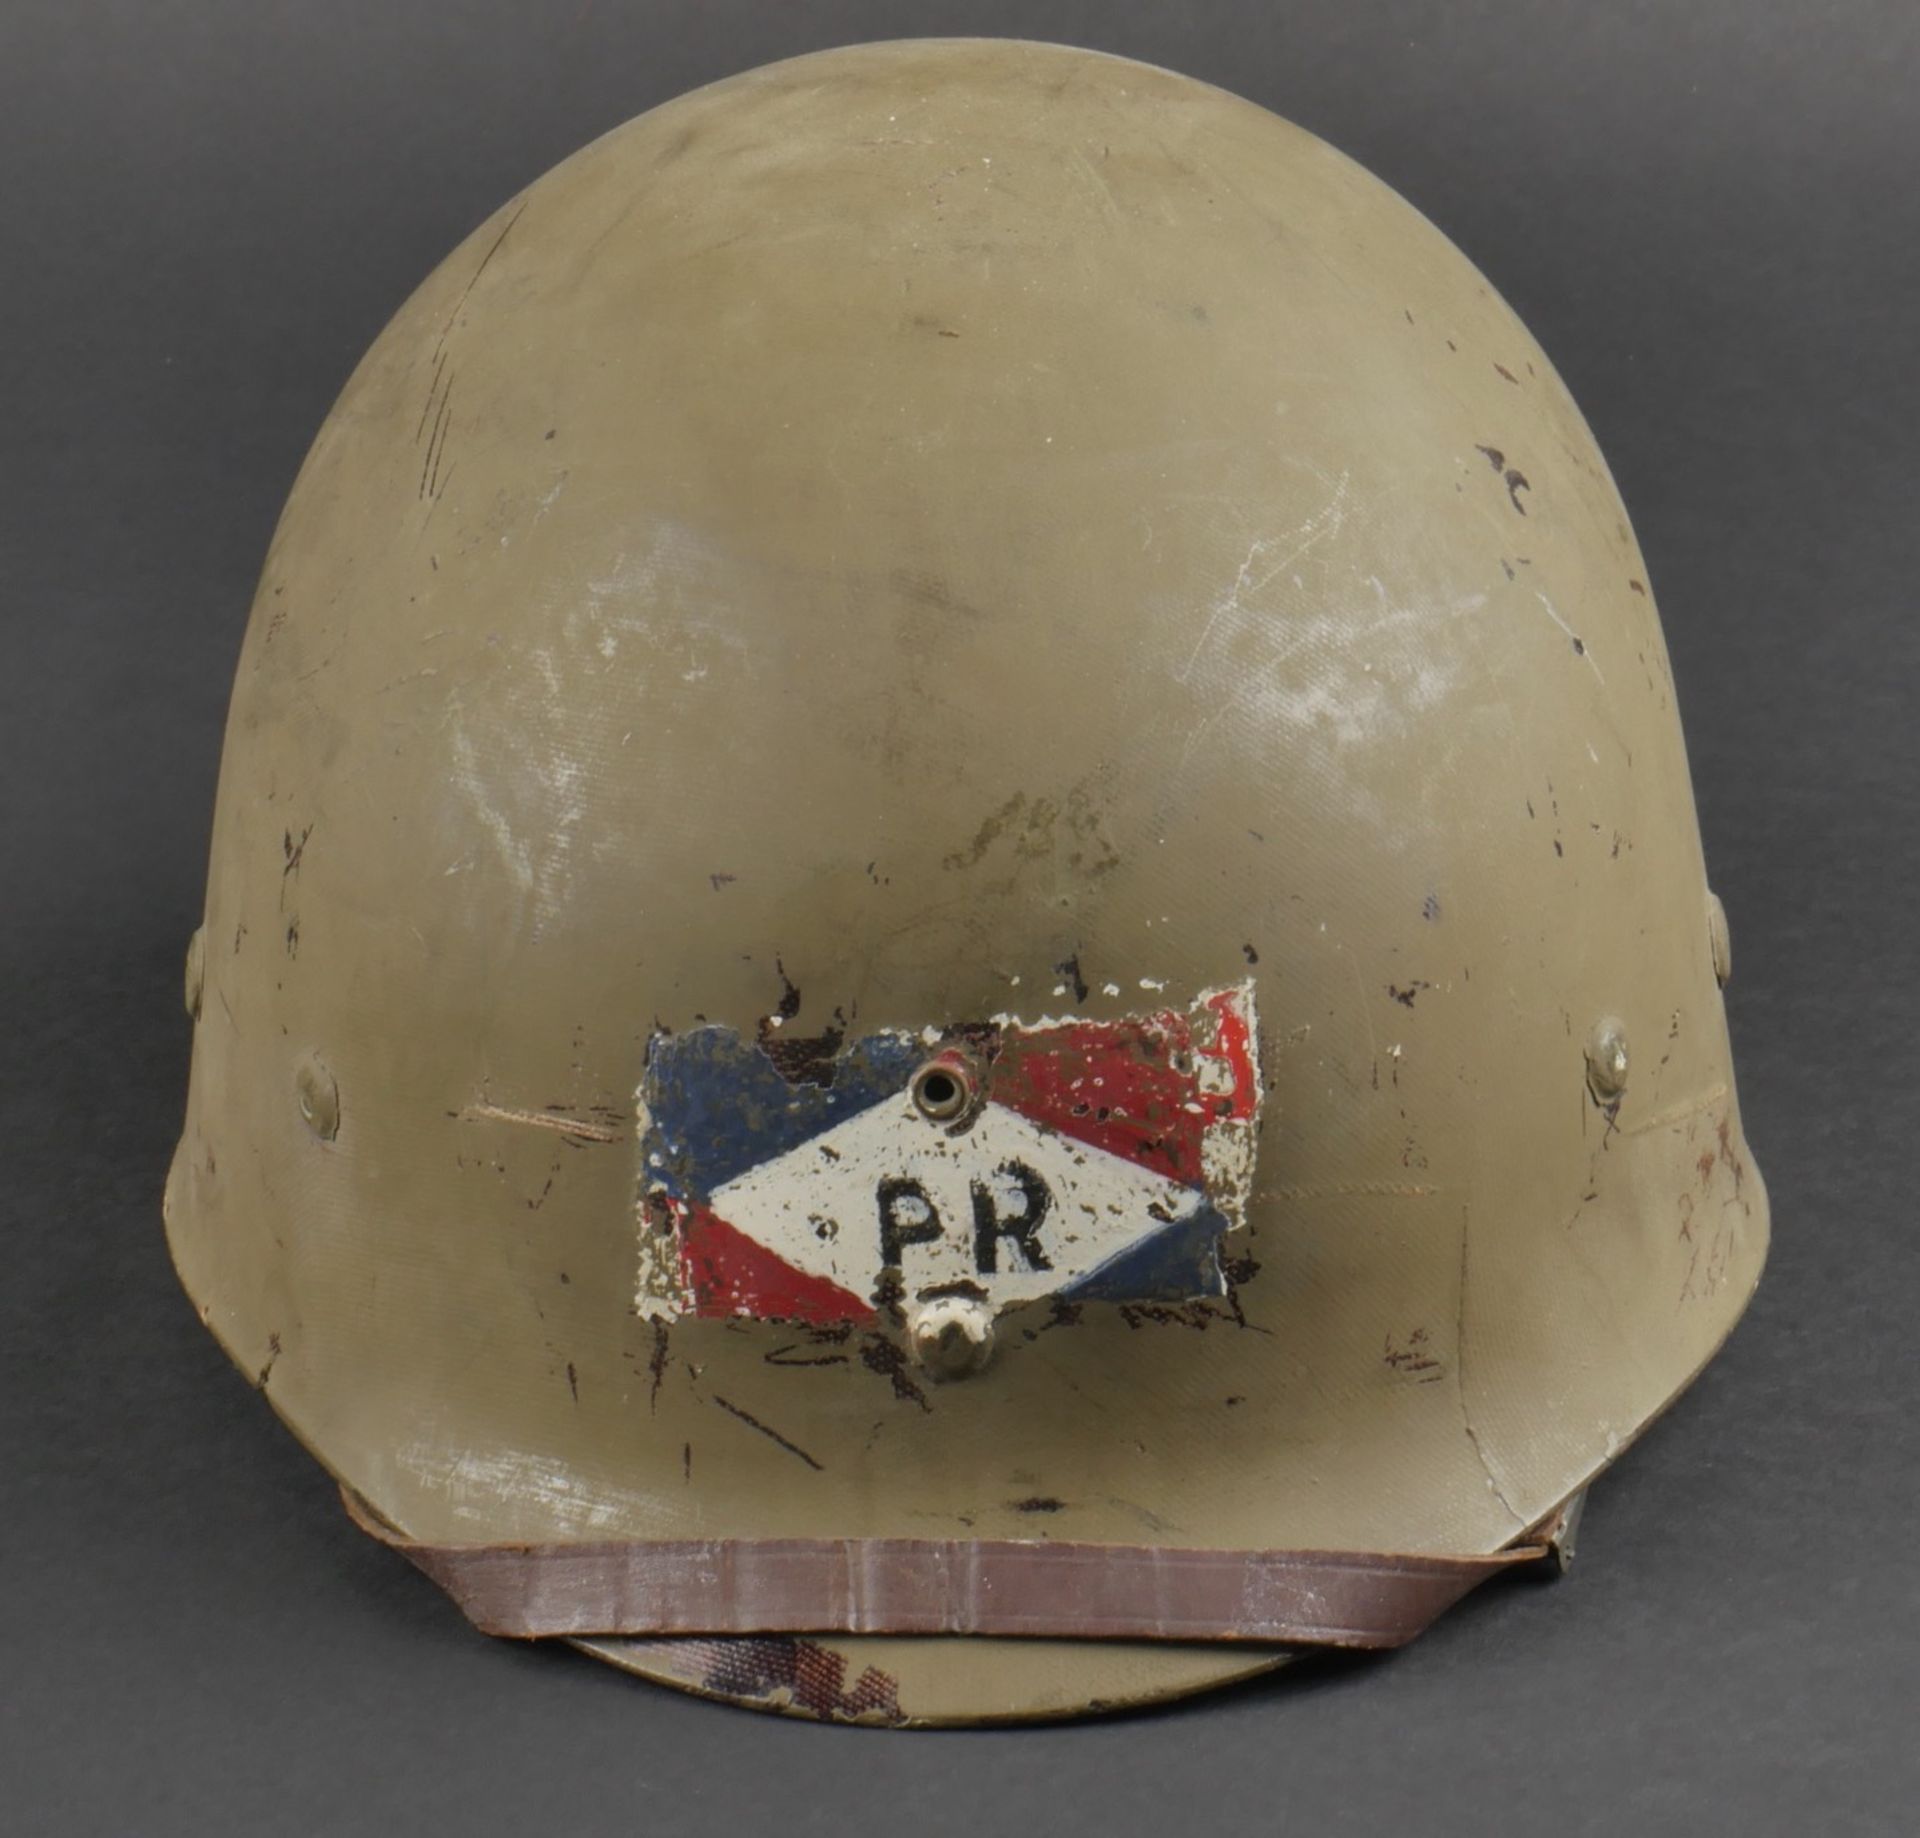 Liner Corps Expeditionnaire francais. French Expeditionary Liner Corps. 